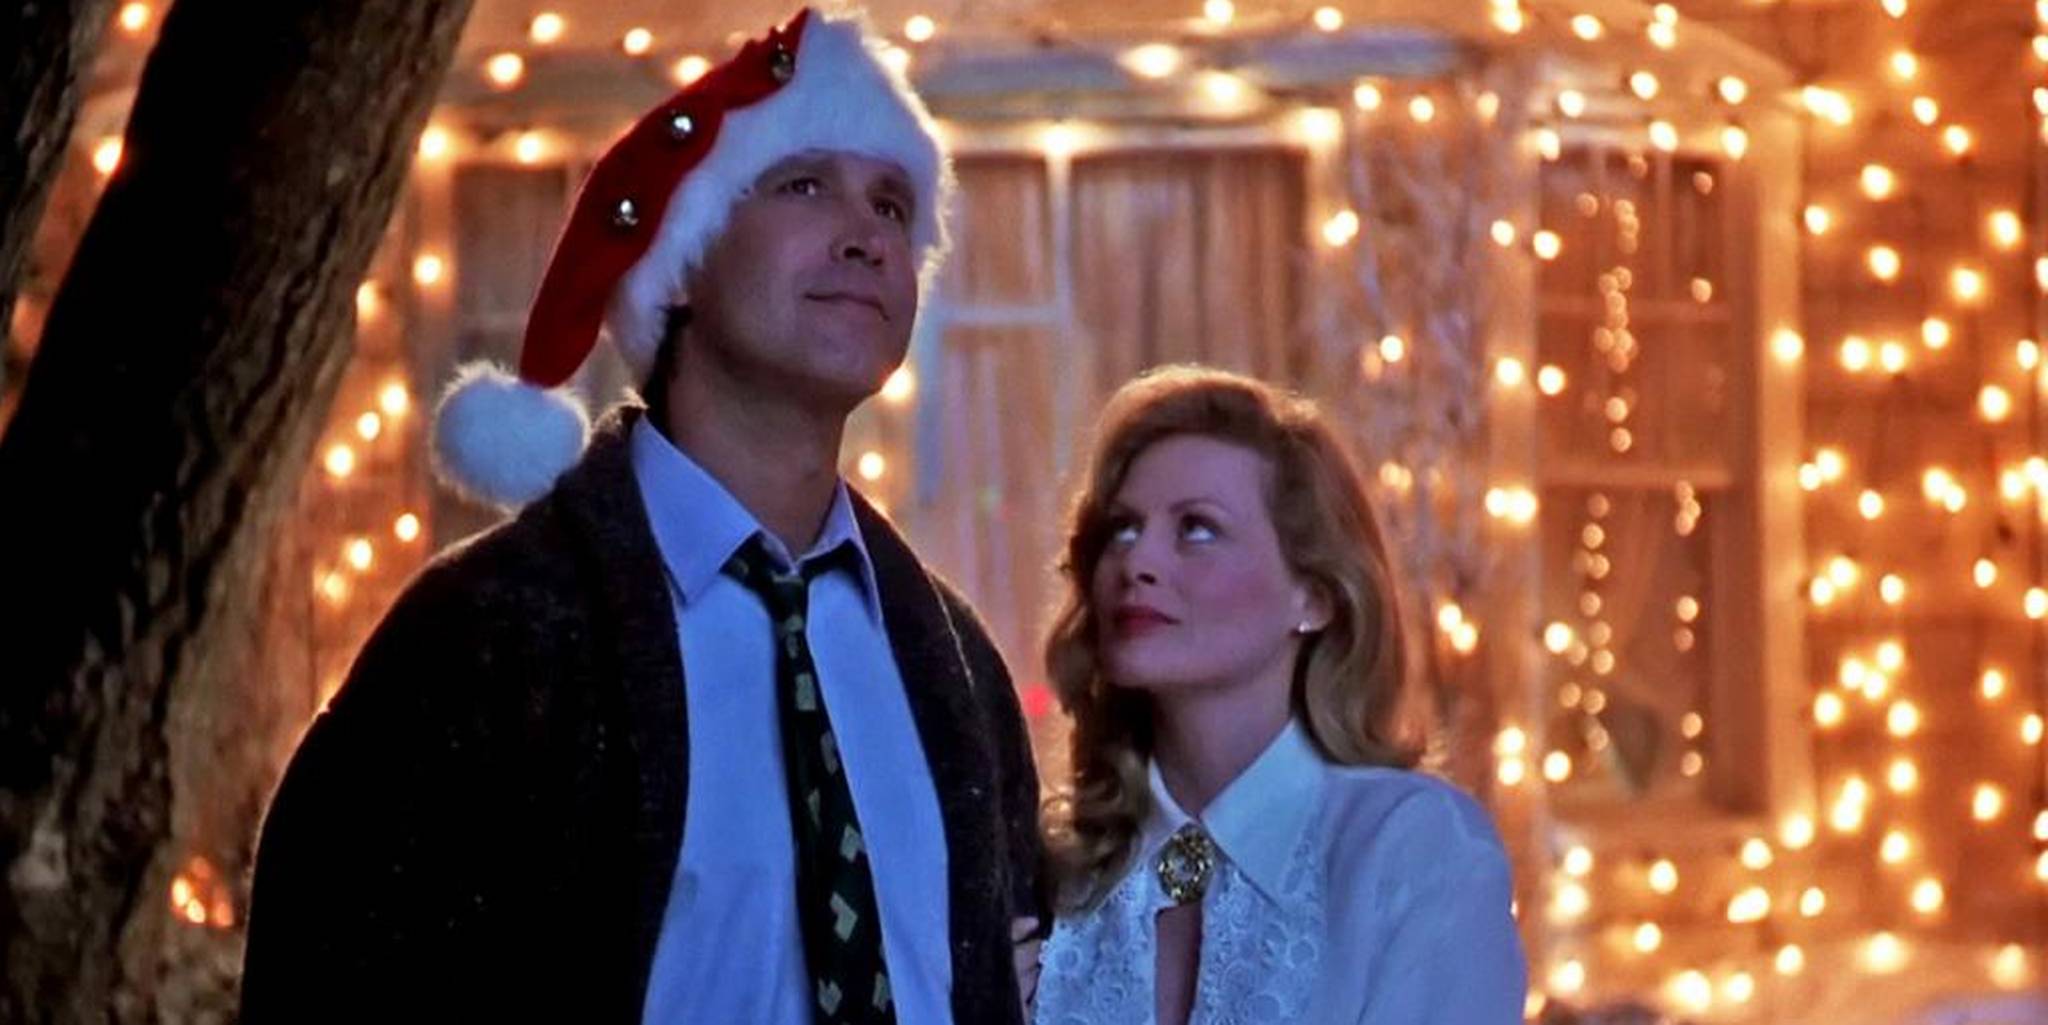 scene from National Lampoon's Christmas Vacation